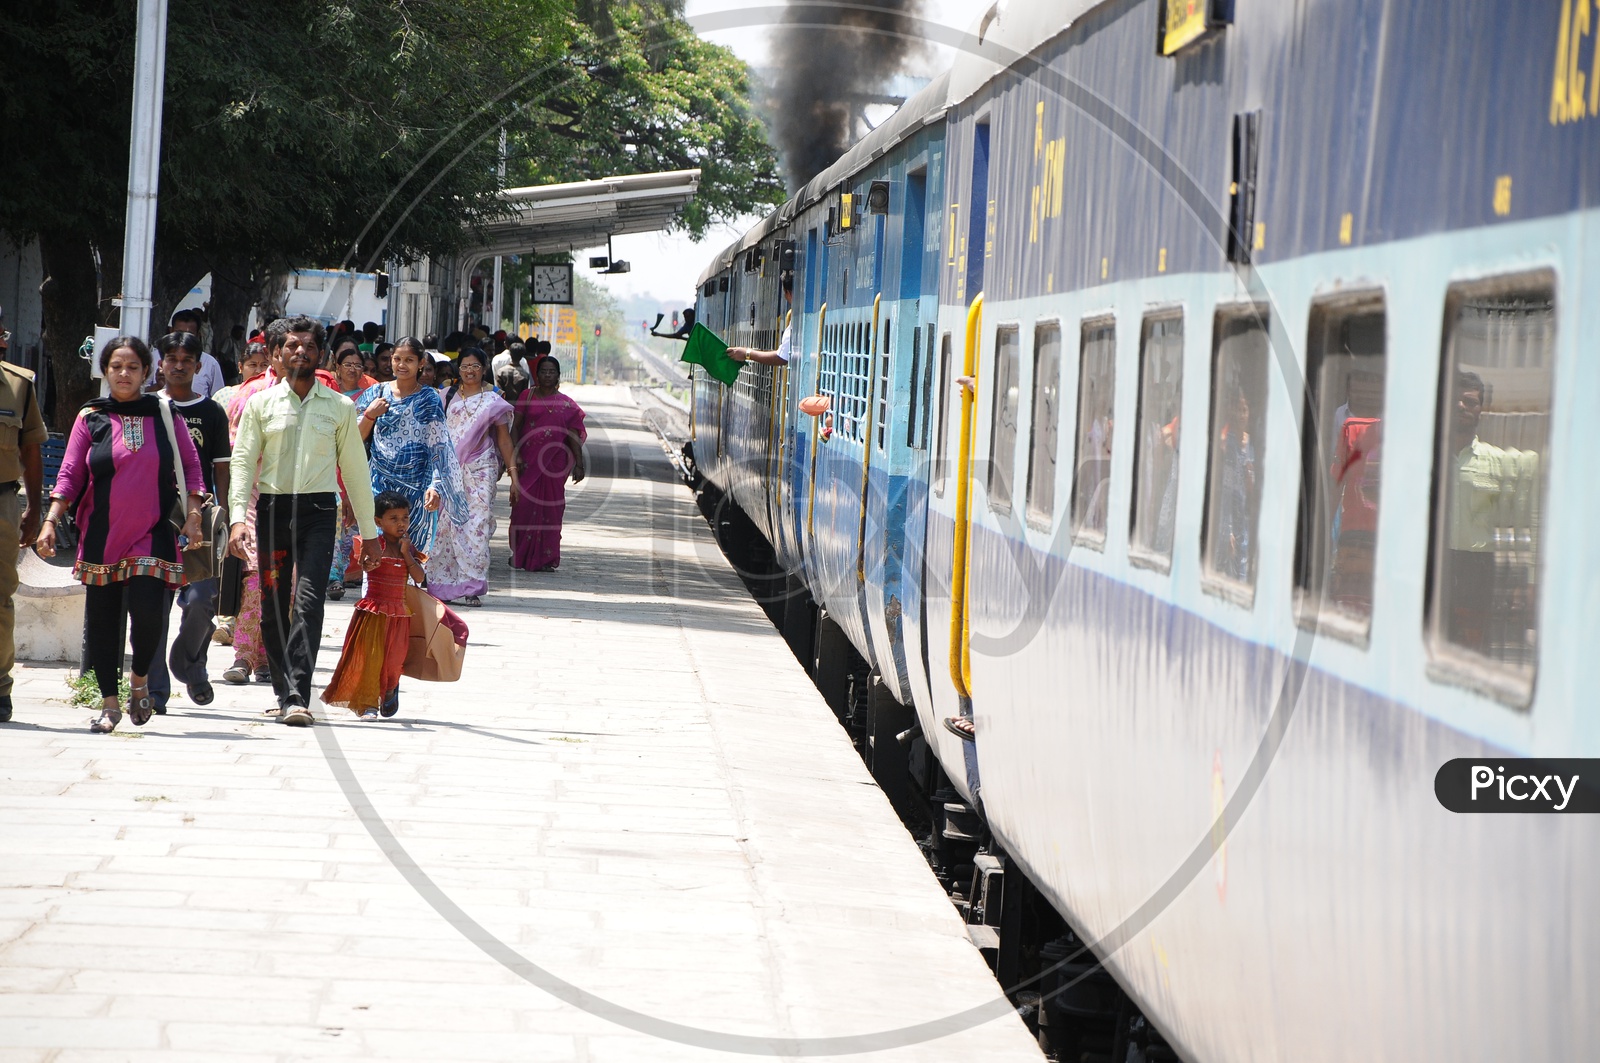 Passengers Walking on Railway Station Footpath With a Train Stranded on Platform